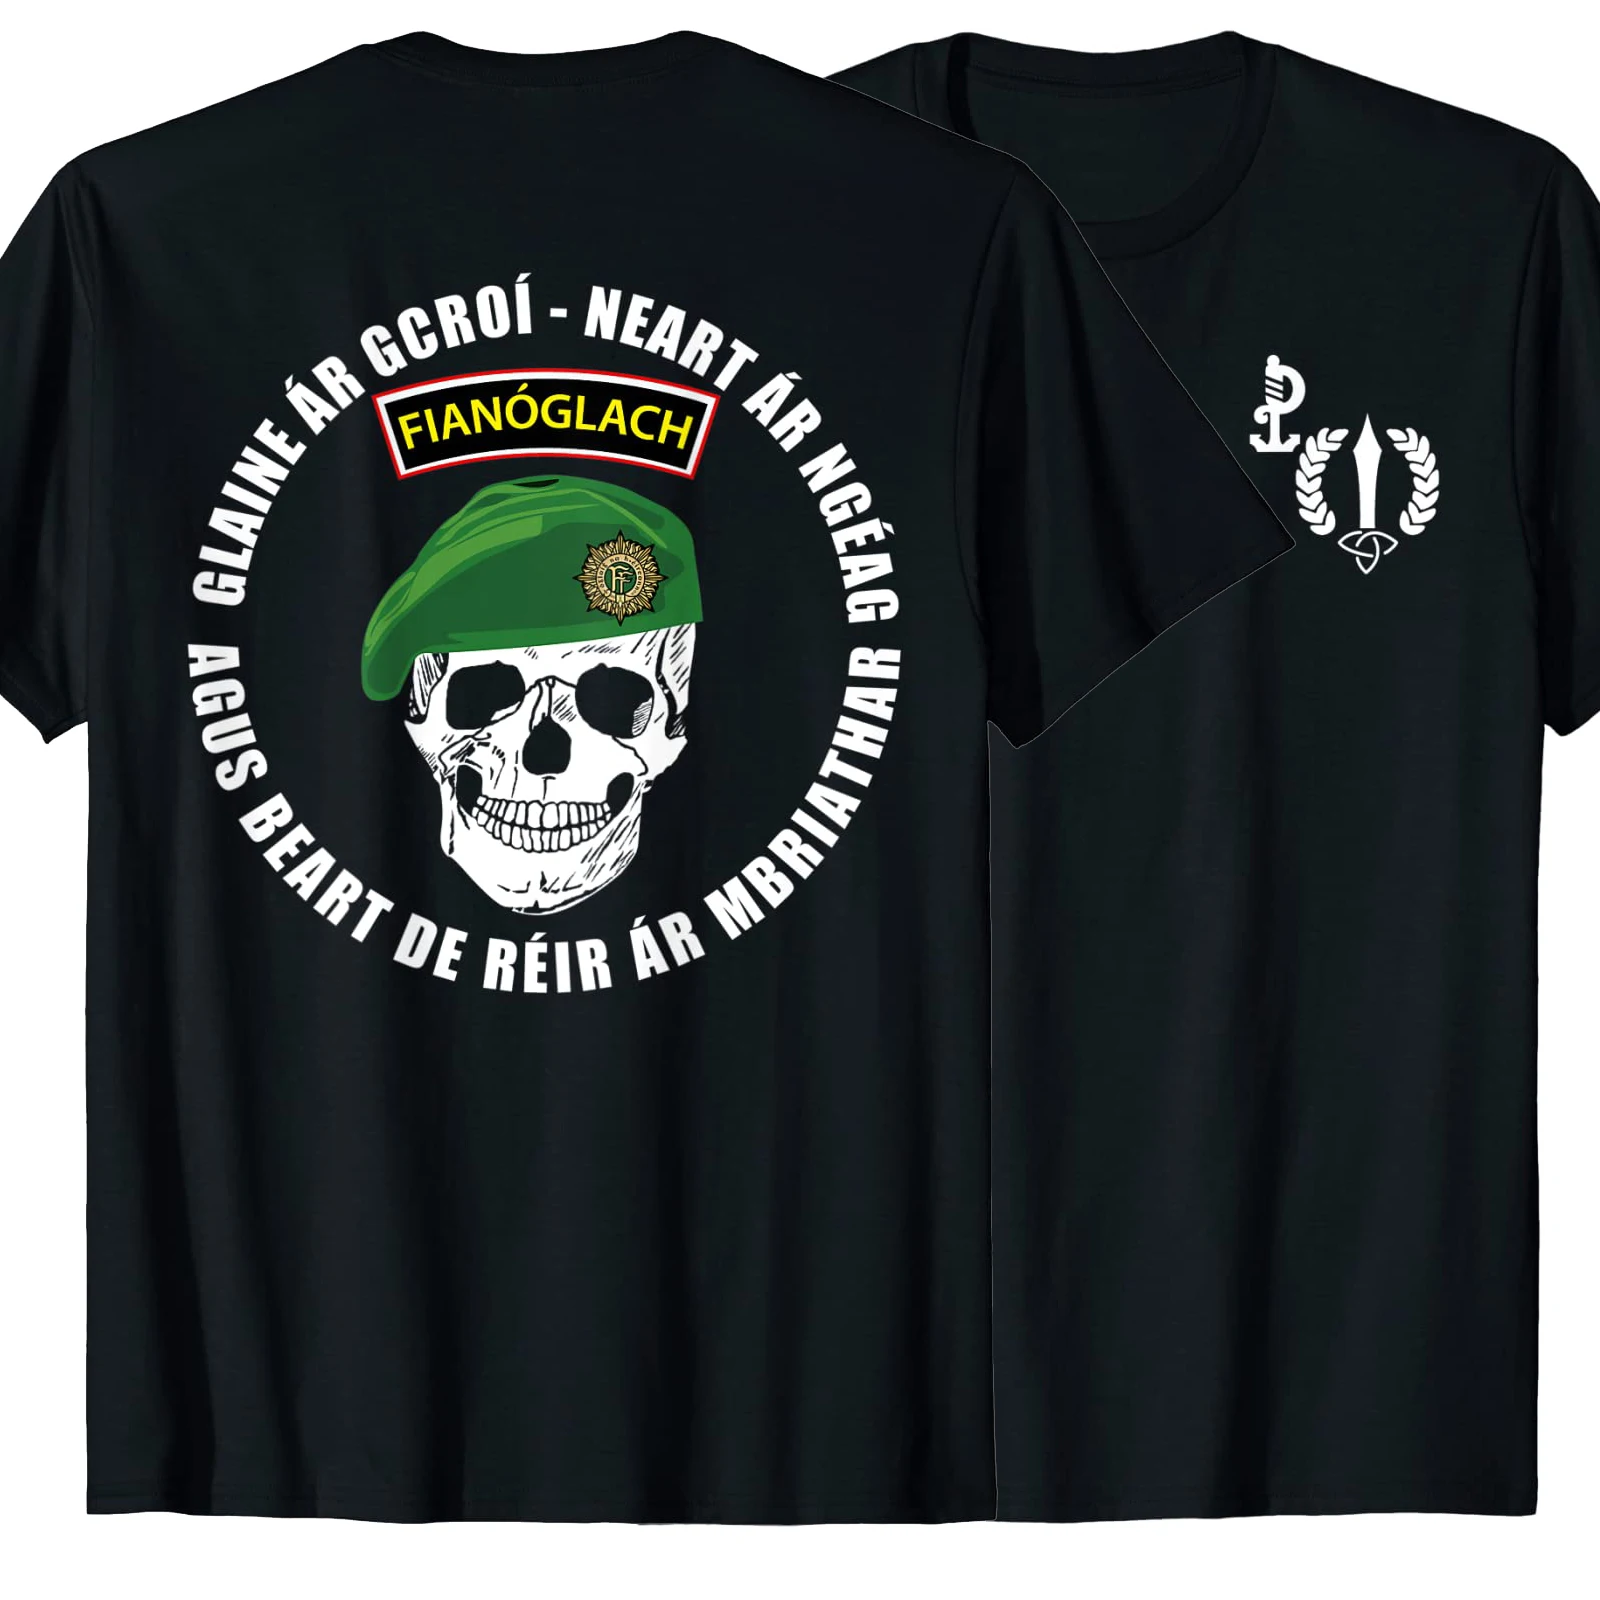 Skænk ring Træde tilbage Ireland ARW Army Ranger Wing Irish Special Forces T Shirt. Short Sleeve 100%  Cotton Casual T-shirts Loose Top Size S-3XL _ - AliExpress Mobile